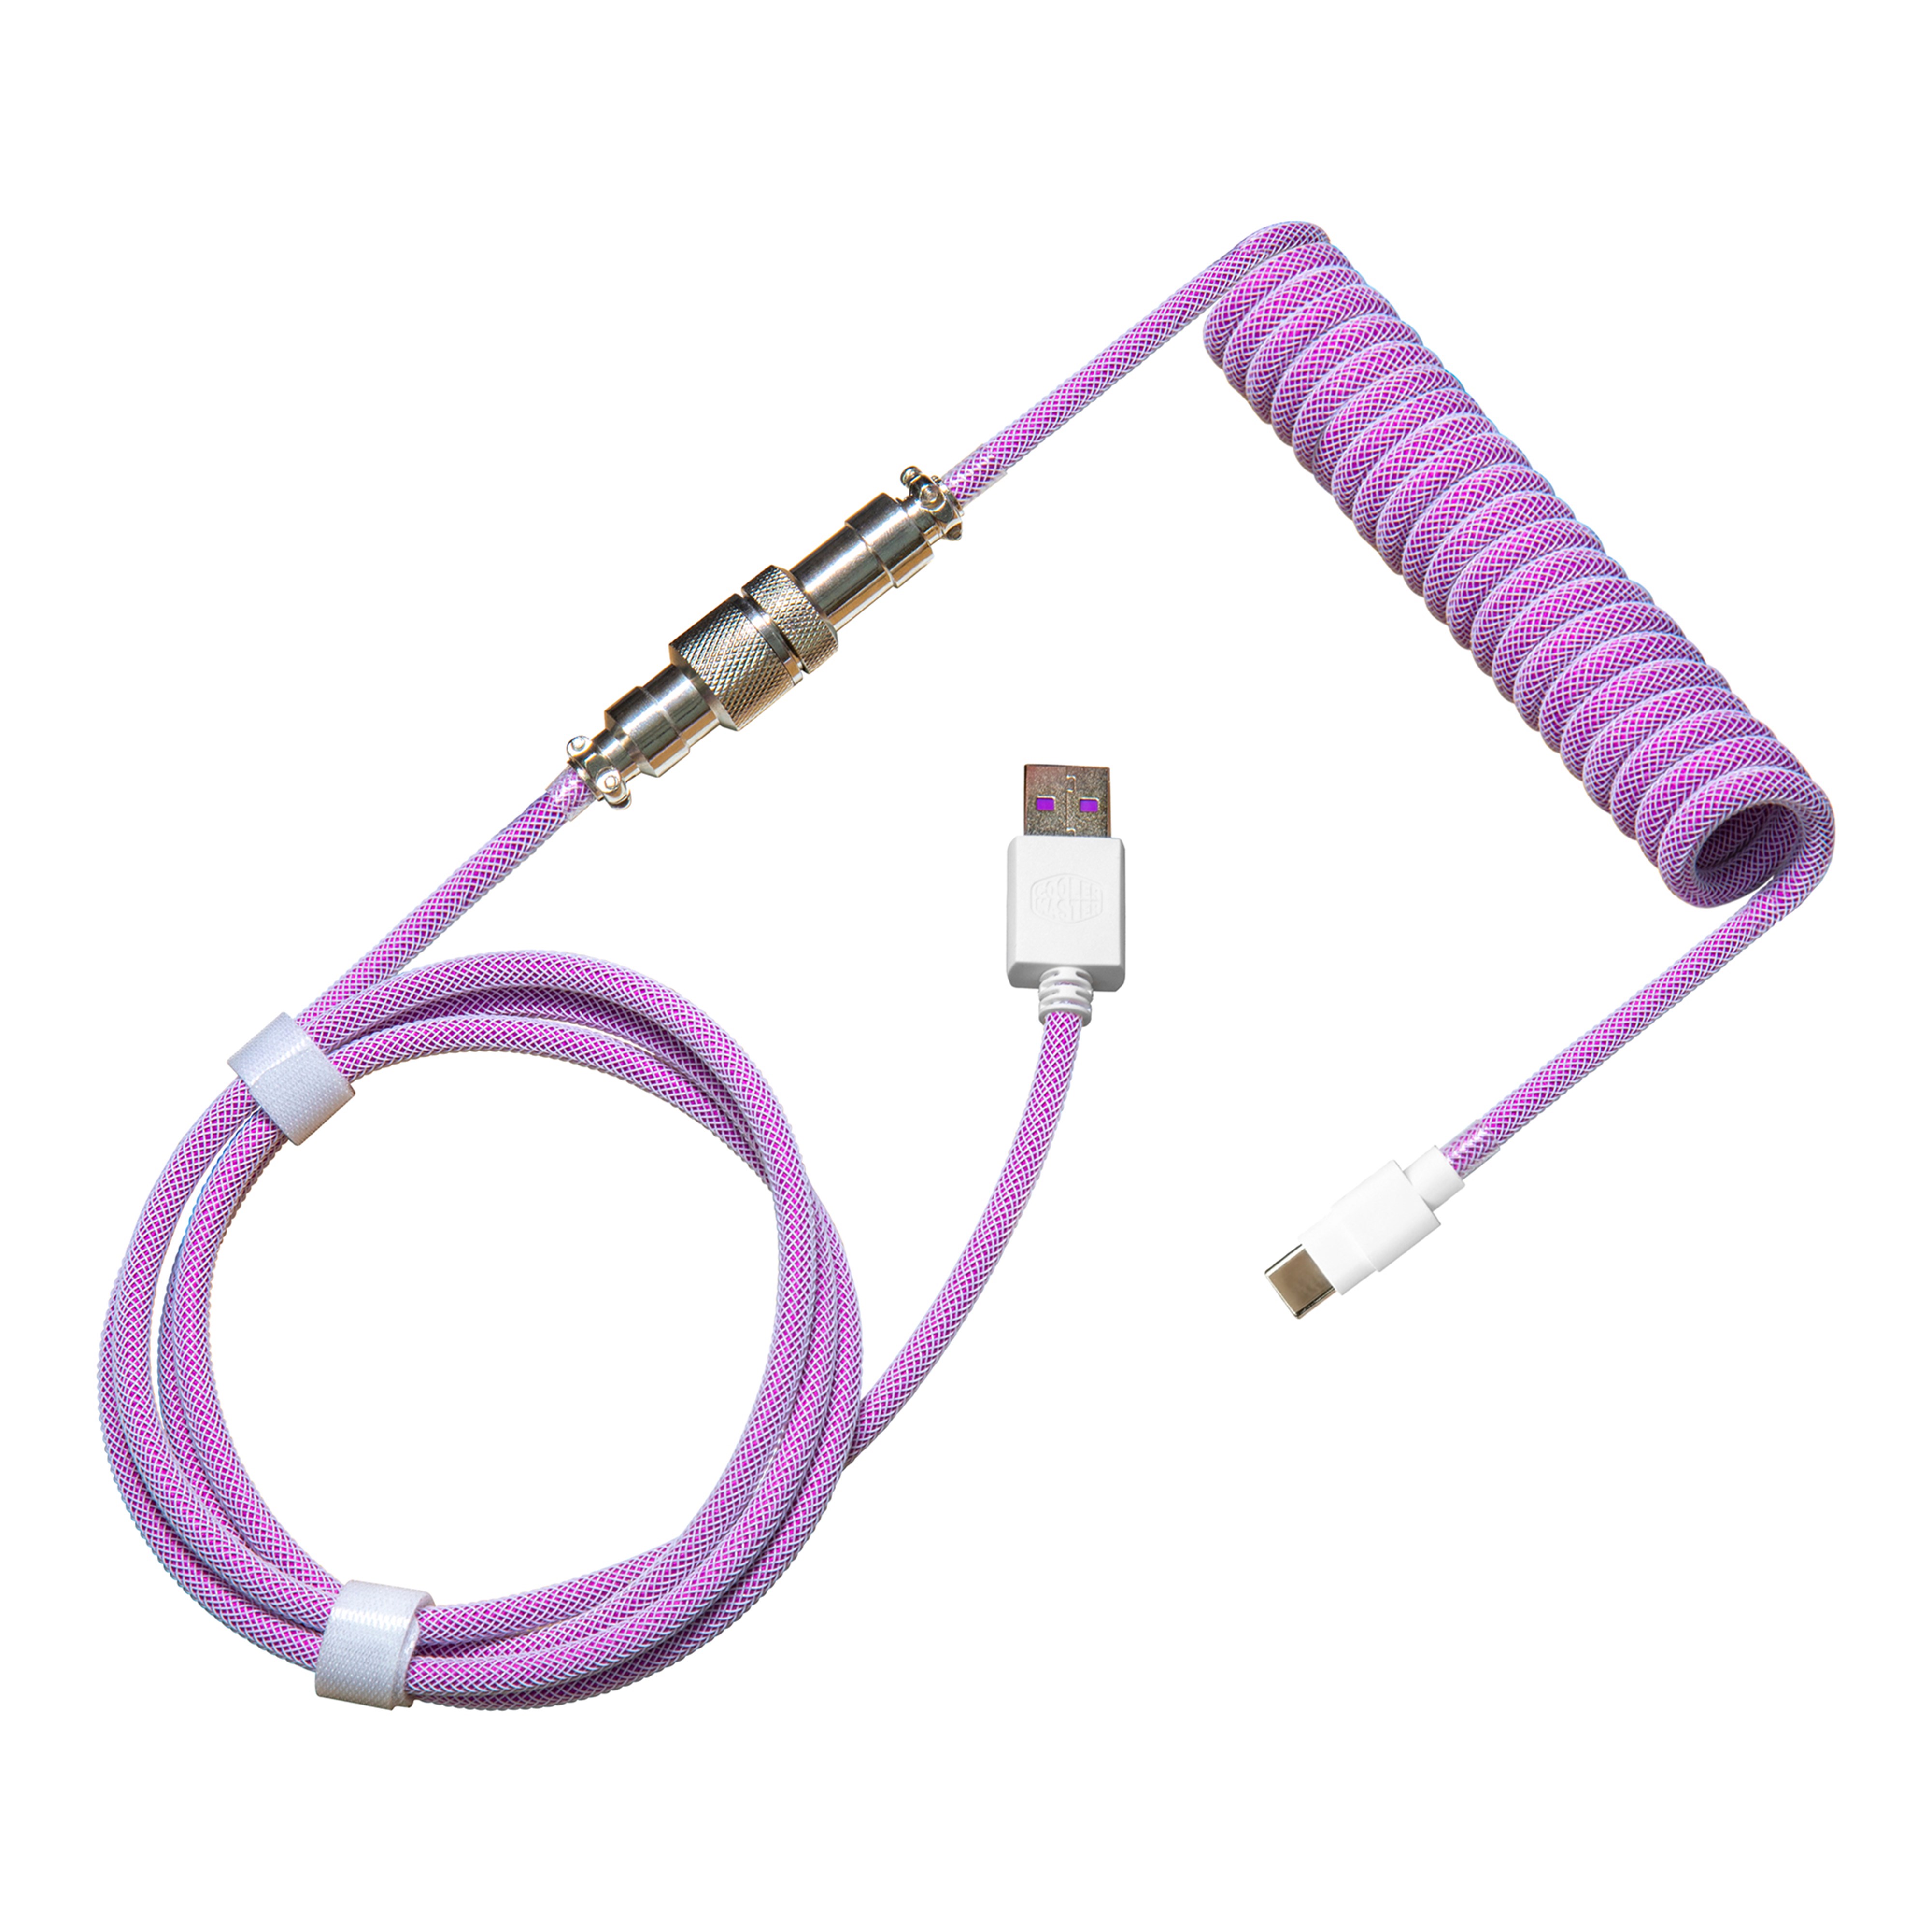 Ready-to-Ship Straight USB Cables - Dream Cables